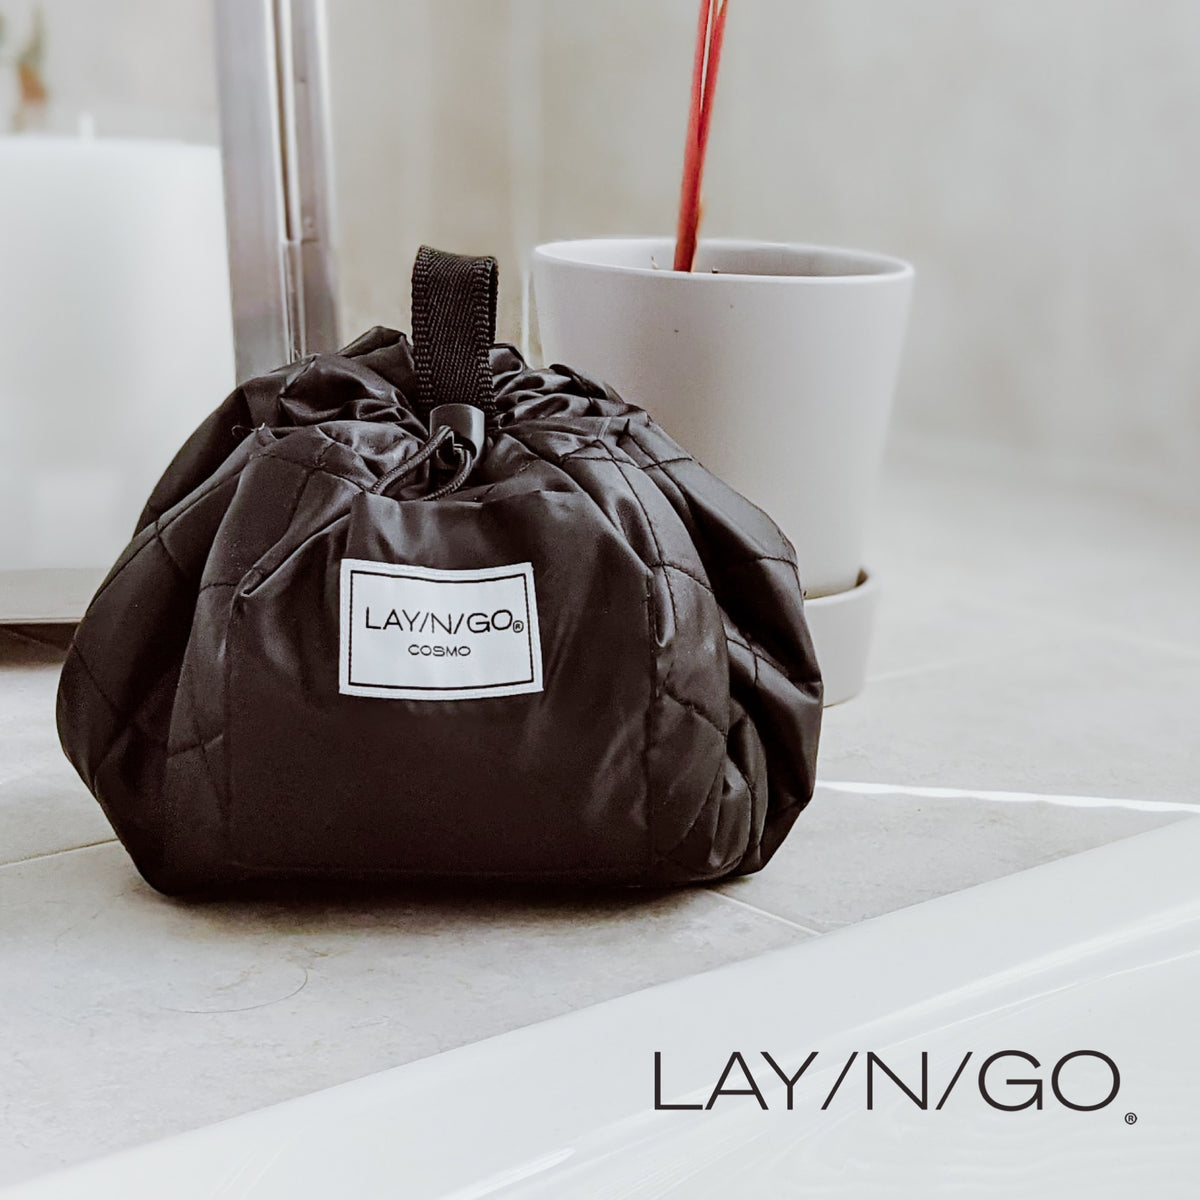 Lay-n-Go COSMO (20